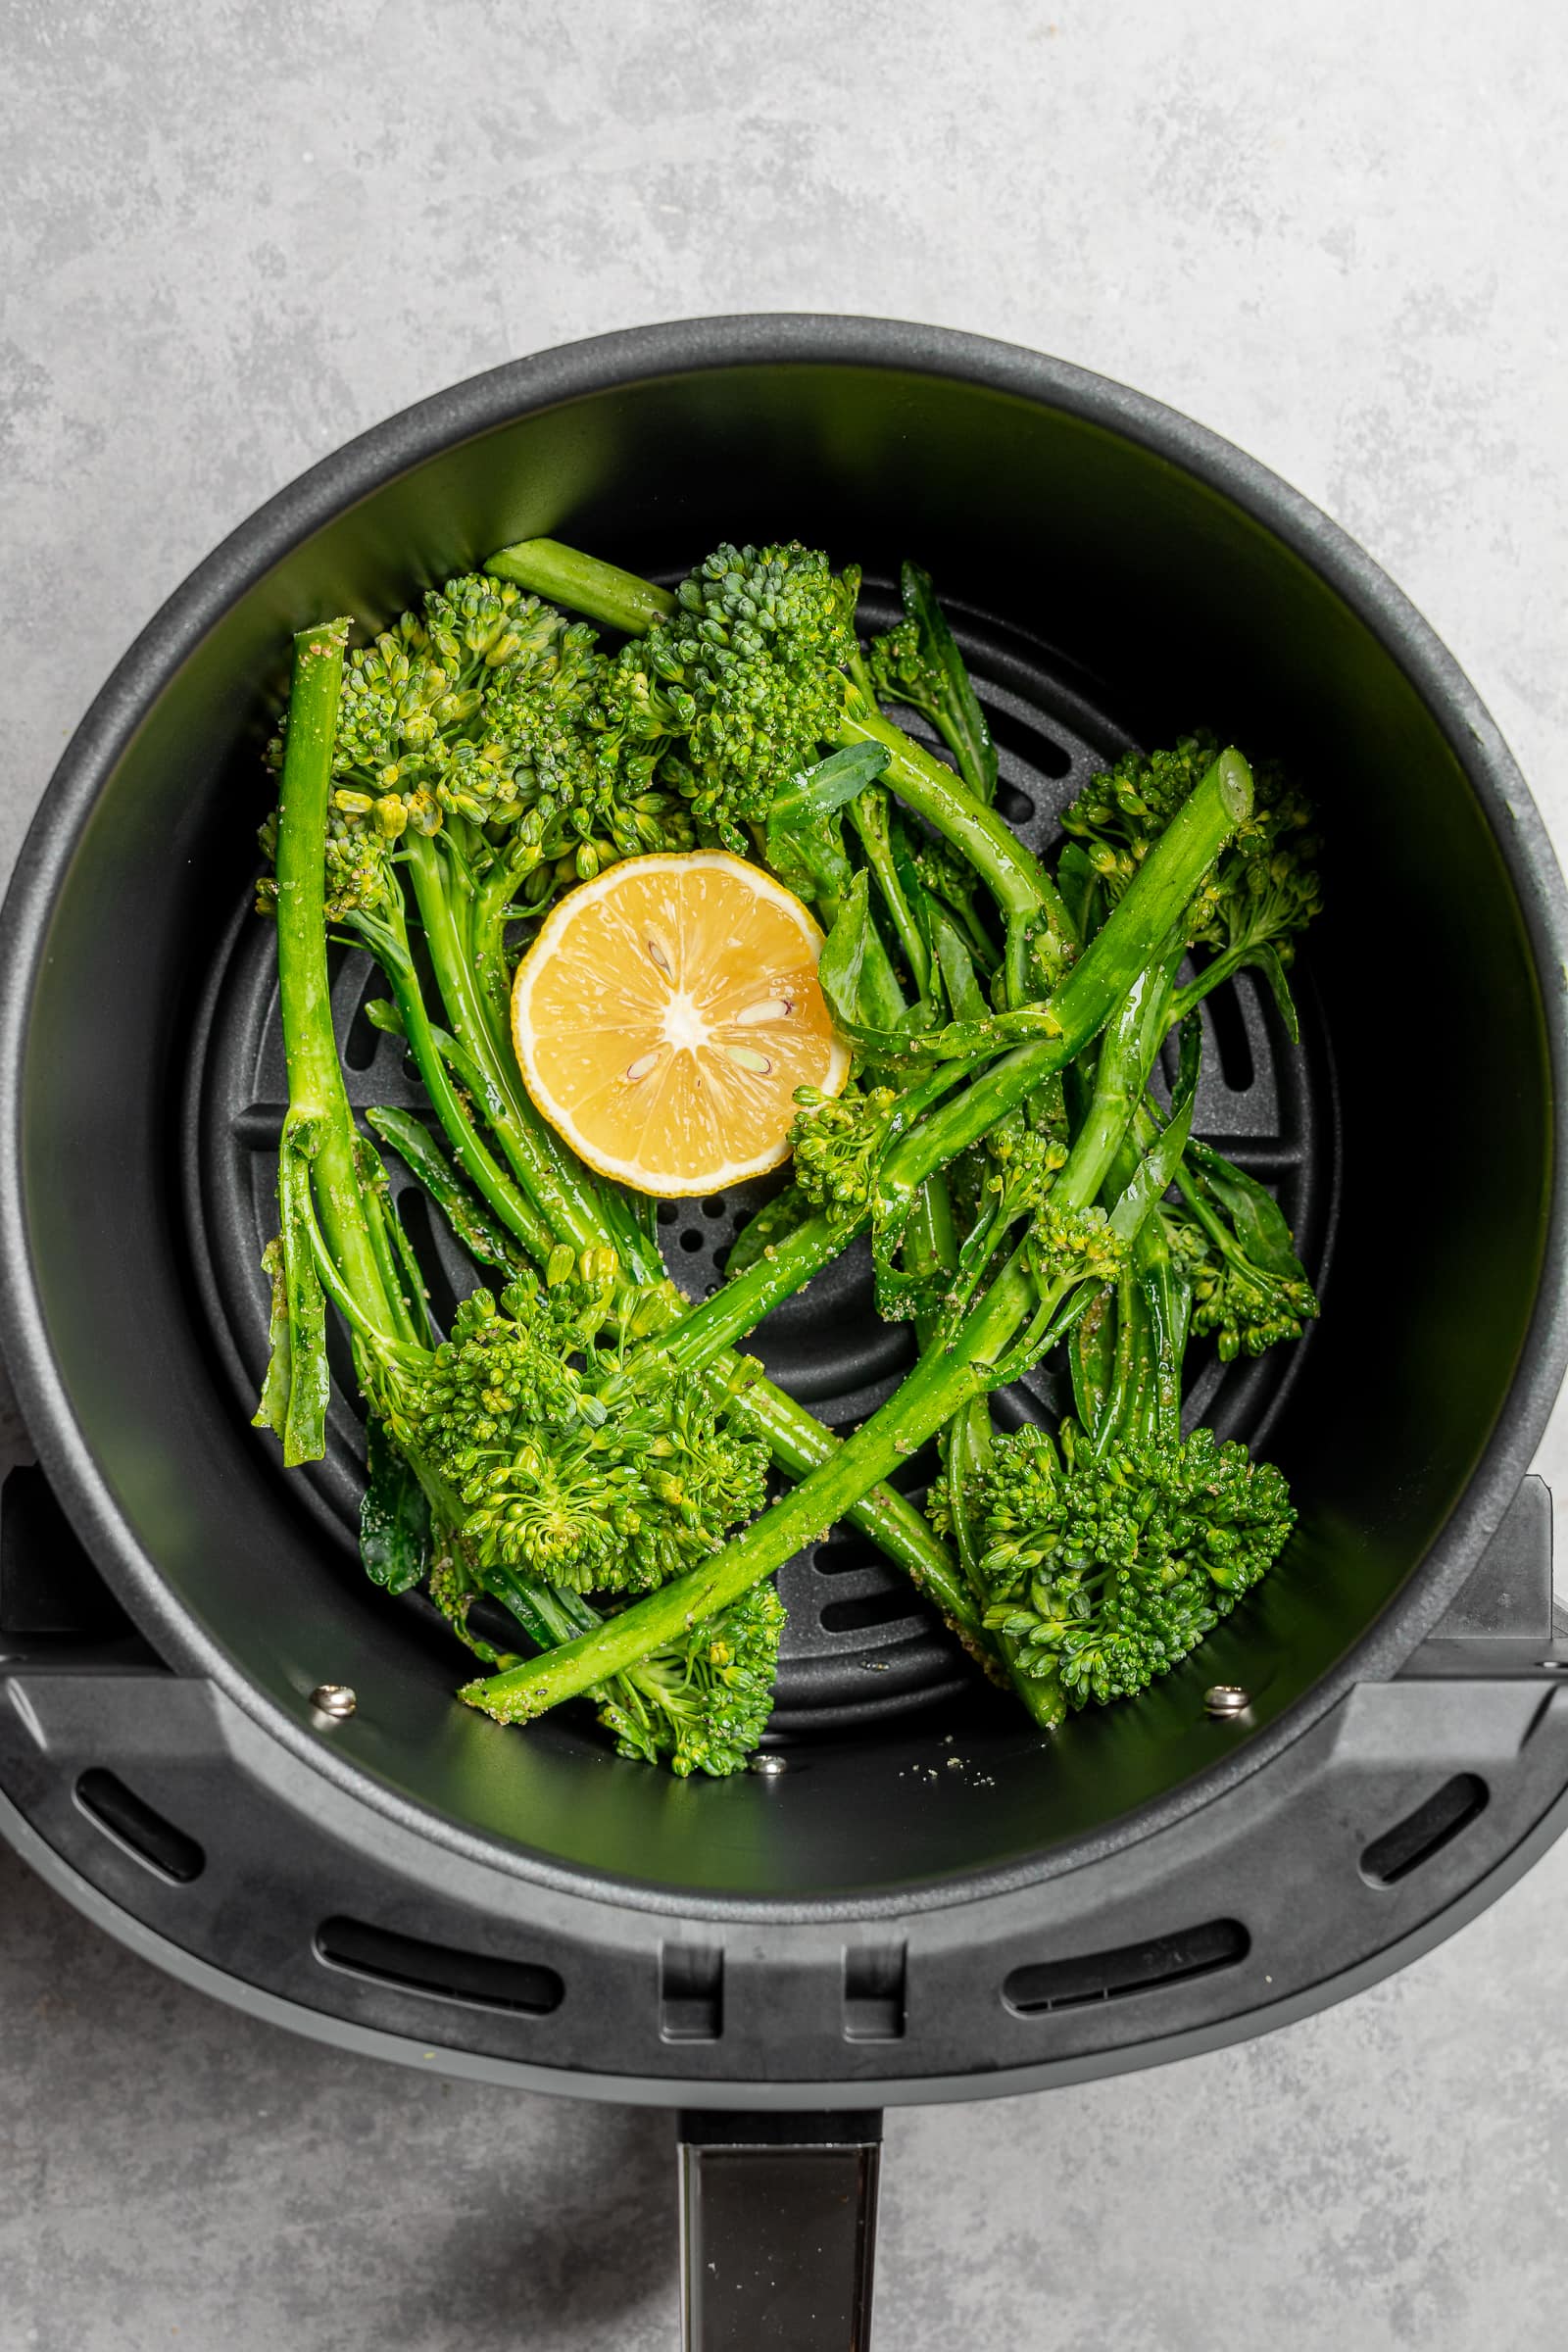 Broccolini in an air fryer basket with a lemon.